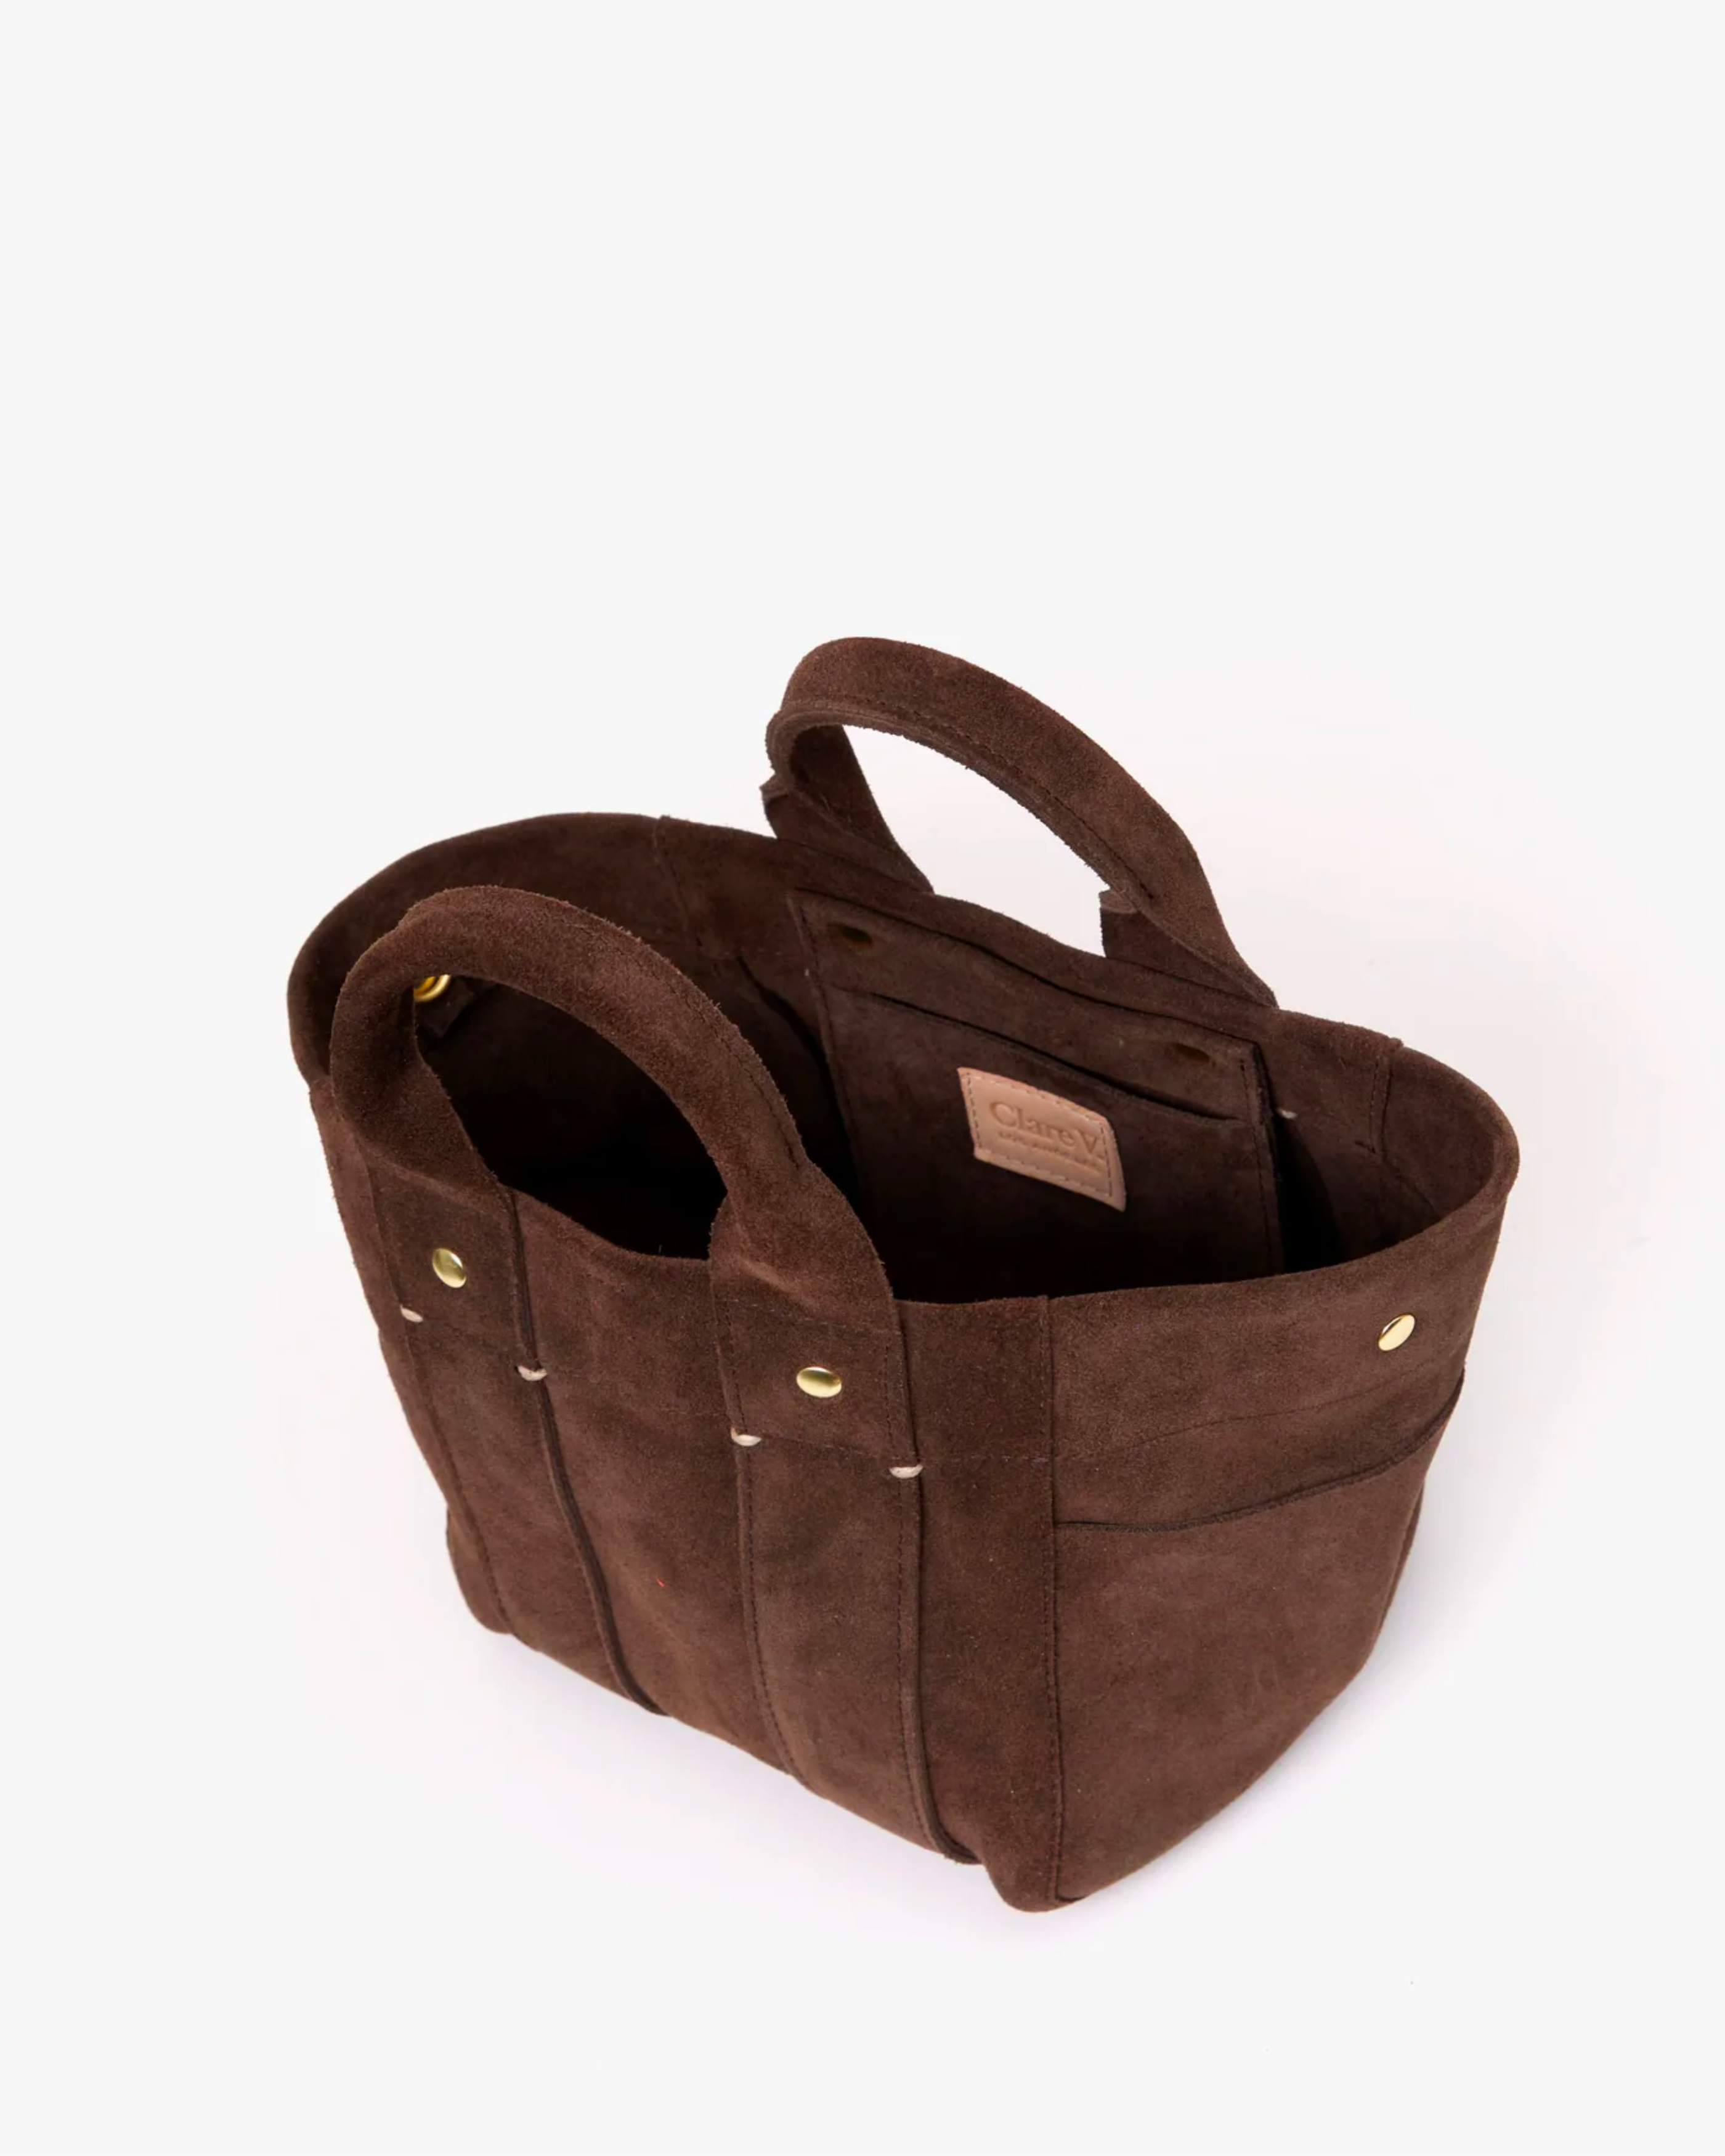 Clare V Le Petit Box Tote in Chocolate Suede